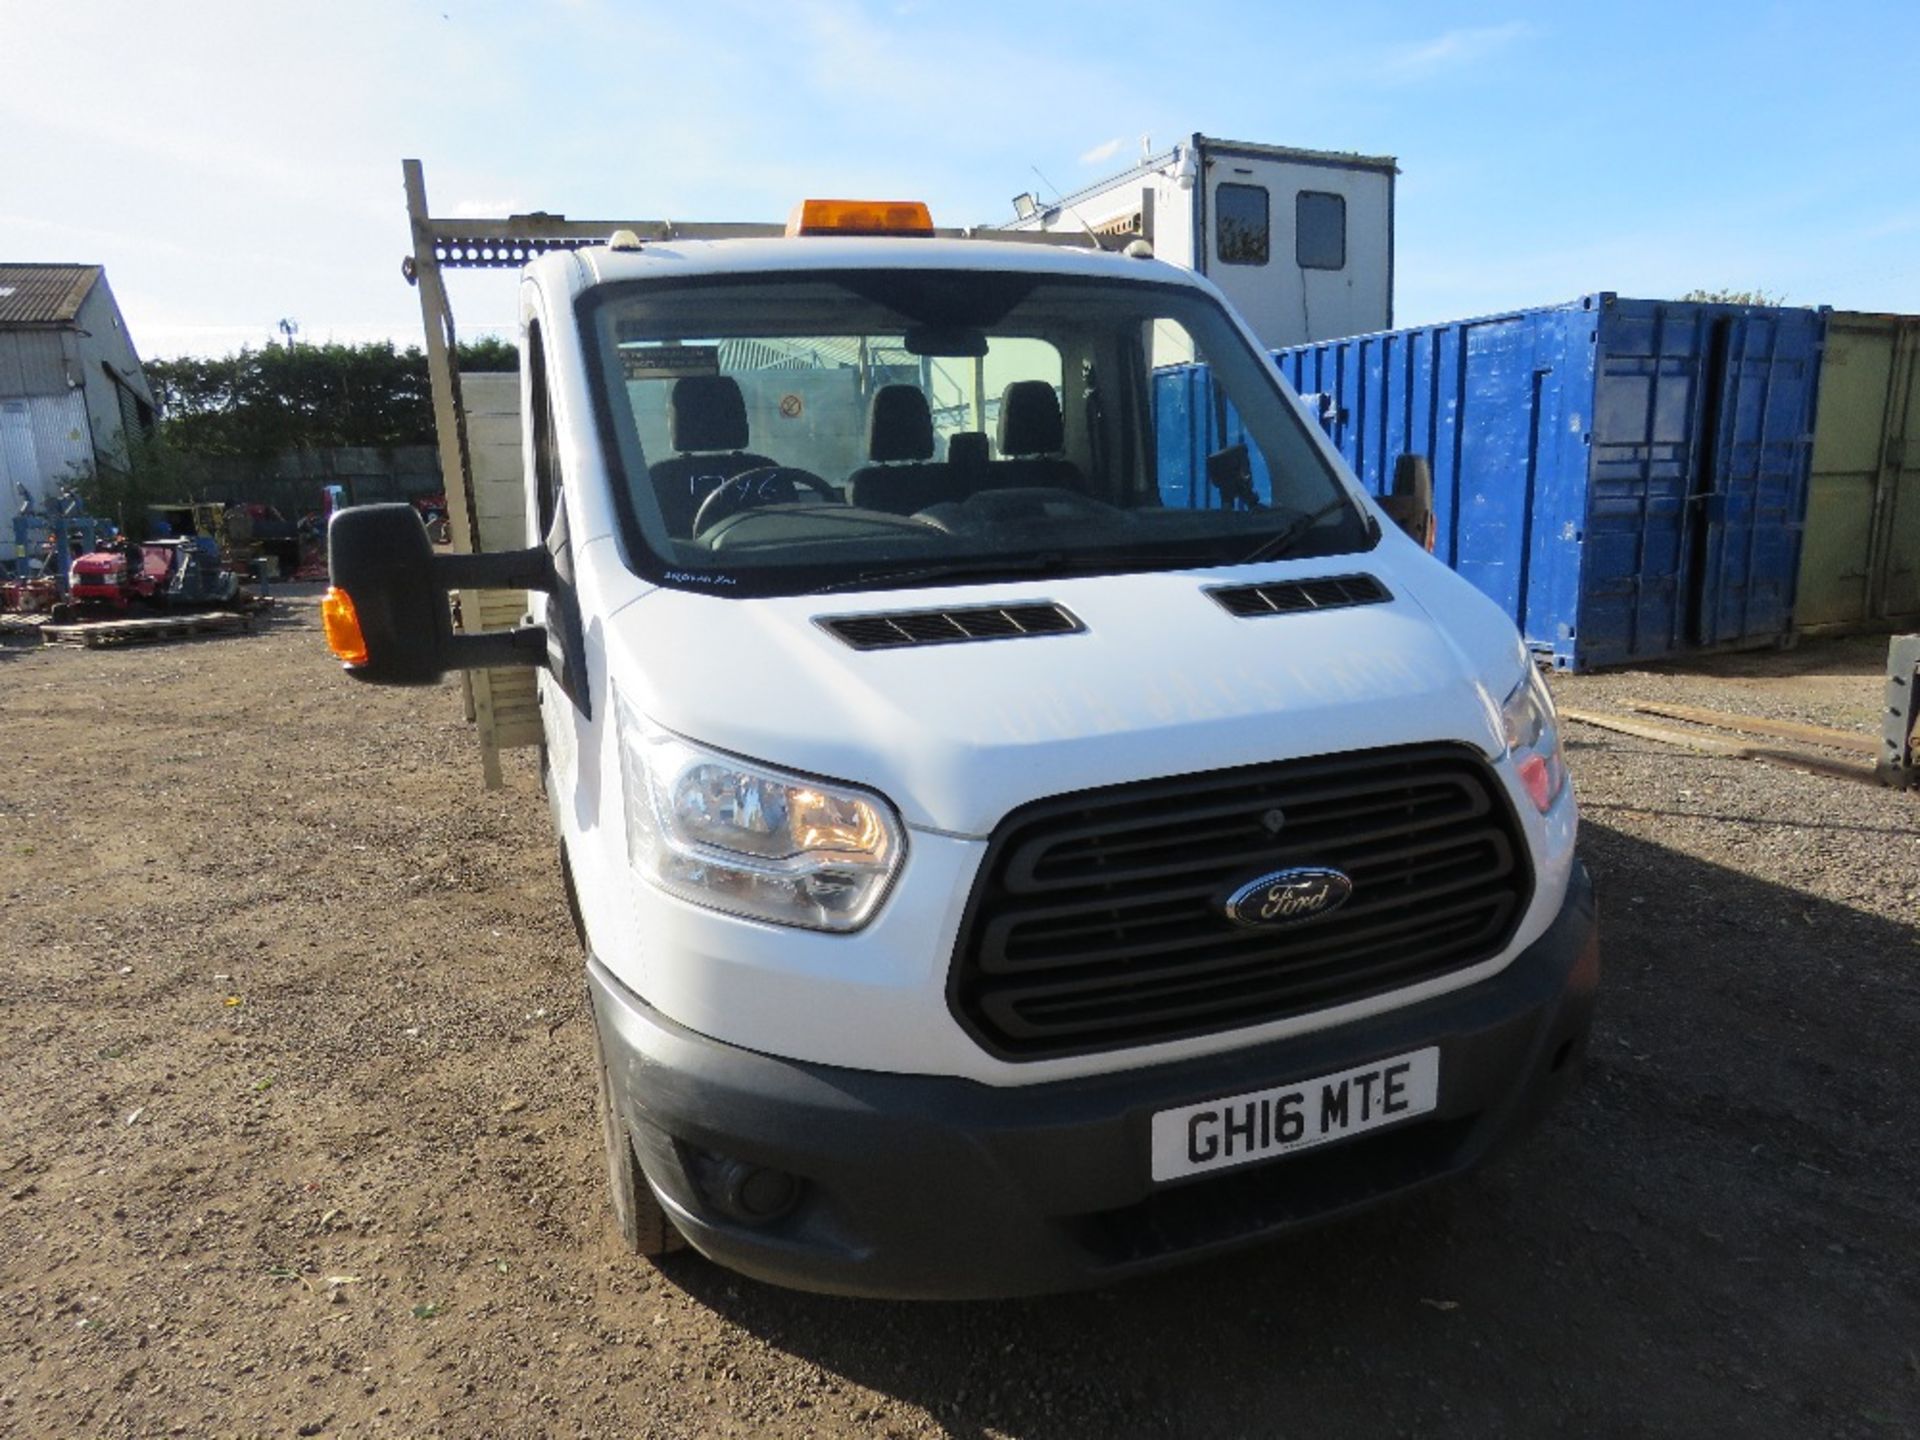 FORD TRANSIT 350 FLAT BED PICKUP TRUCK WITH REAR TAIL LIFT REG:GH16 MTE. WITH V5, OWNED BY VENDOR FR - Image 2 of 13